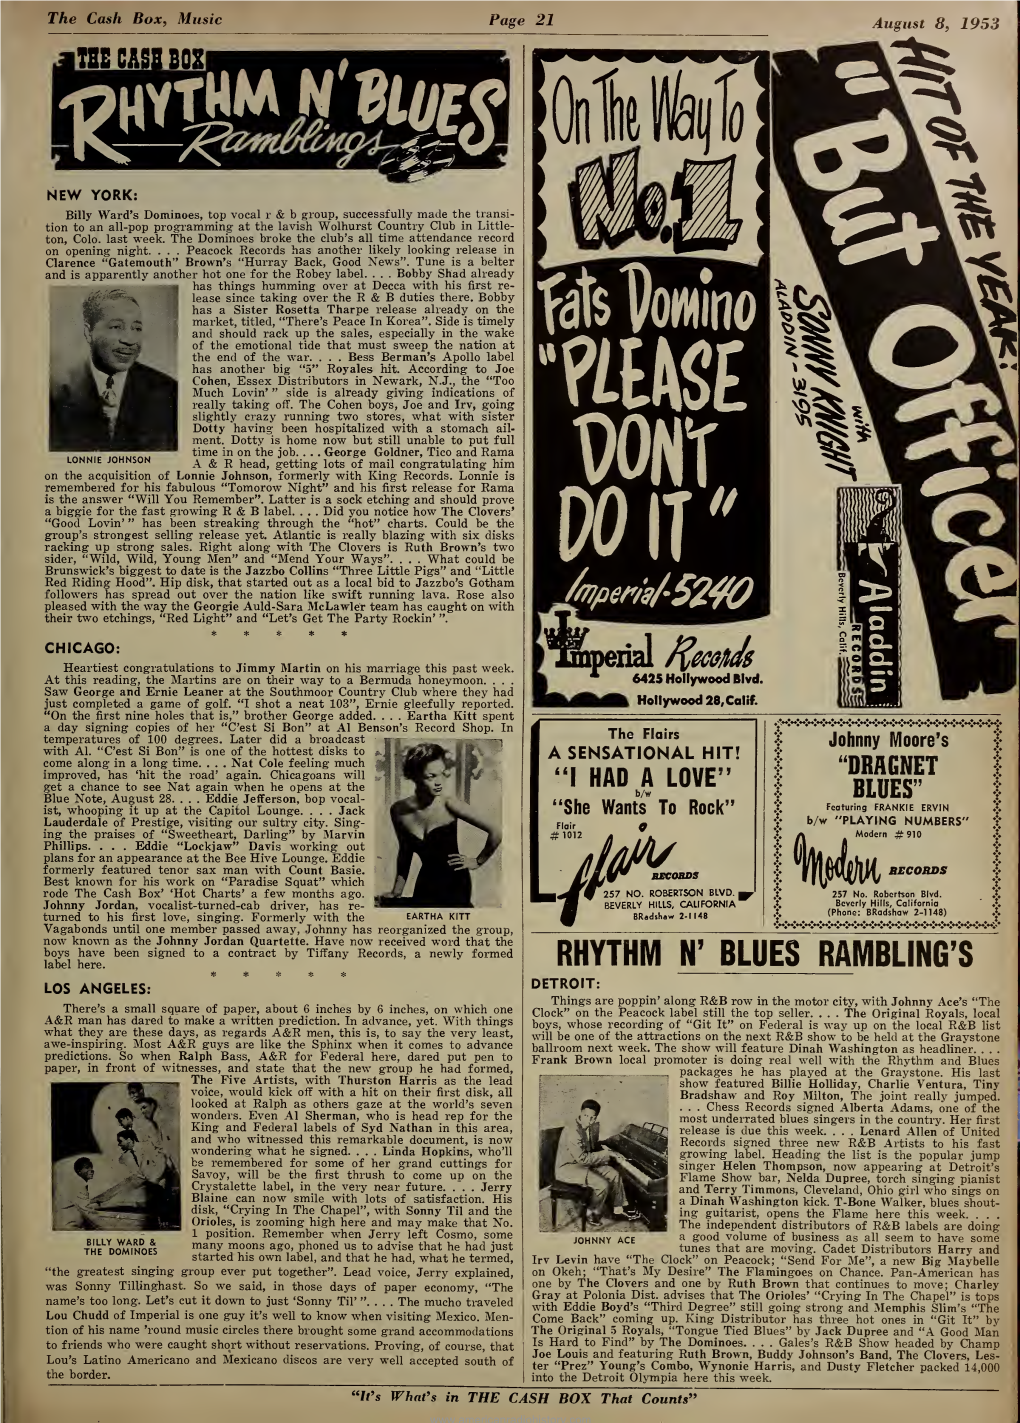 Cash Box, Music Page 21 August 8, 1953